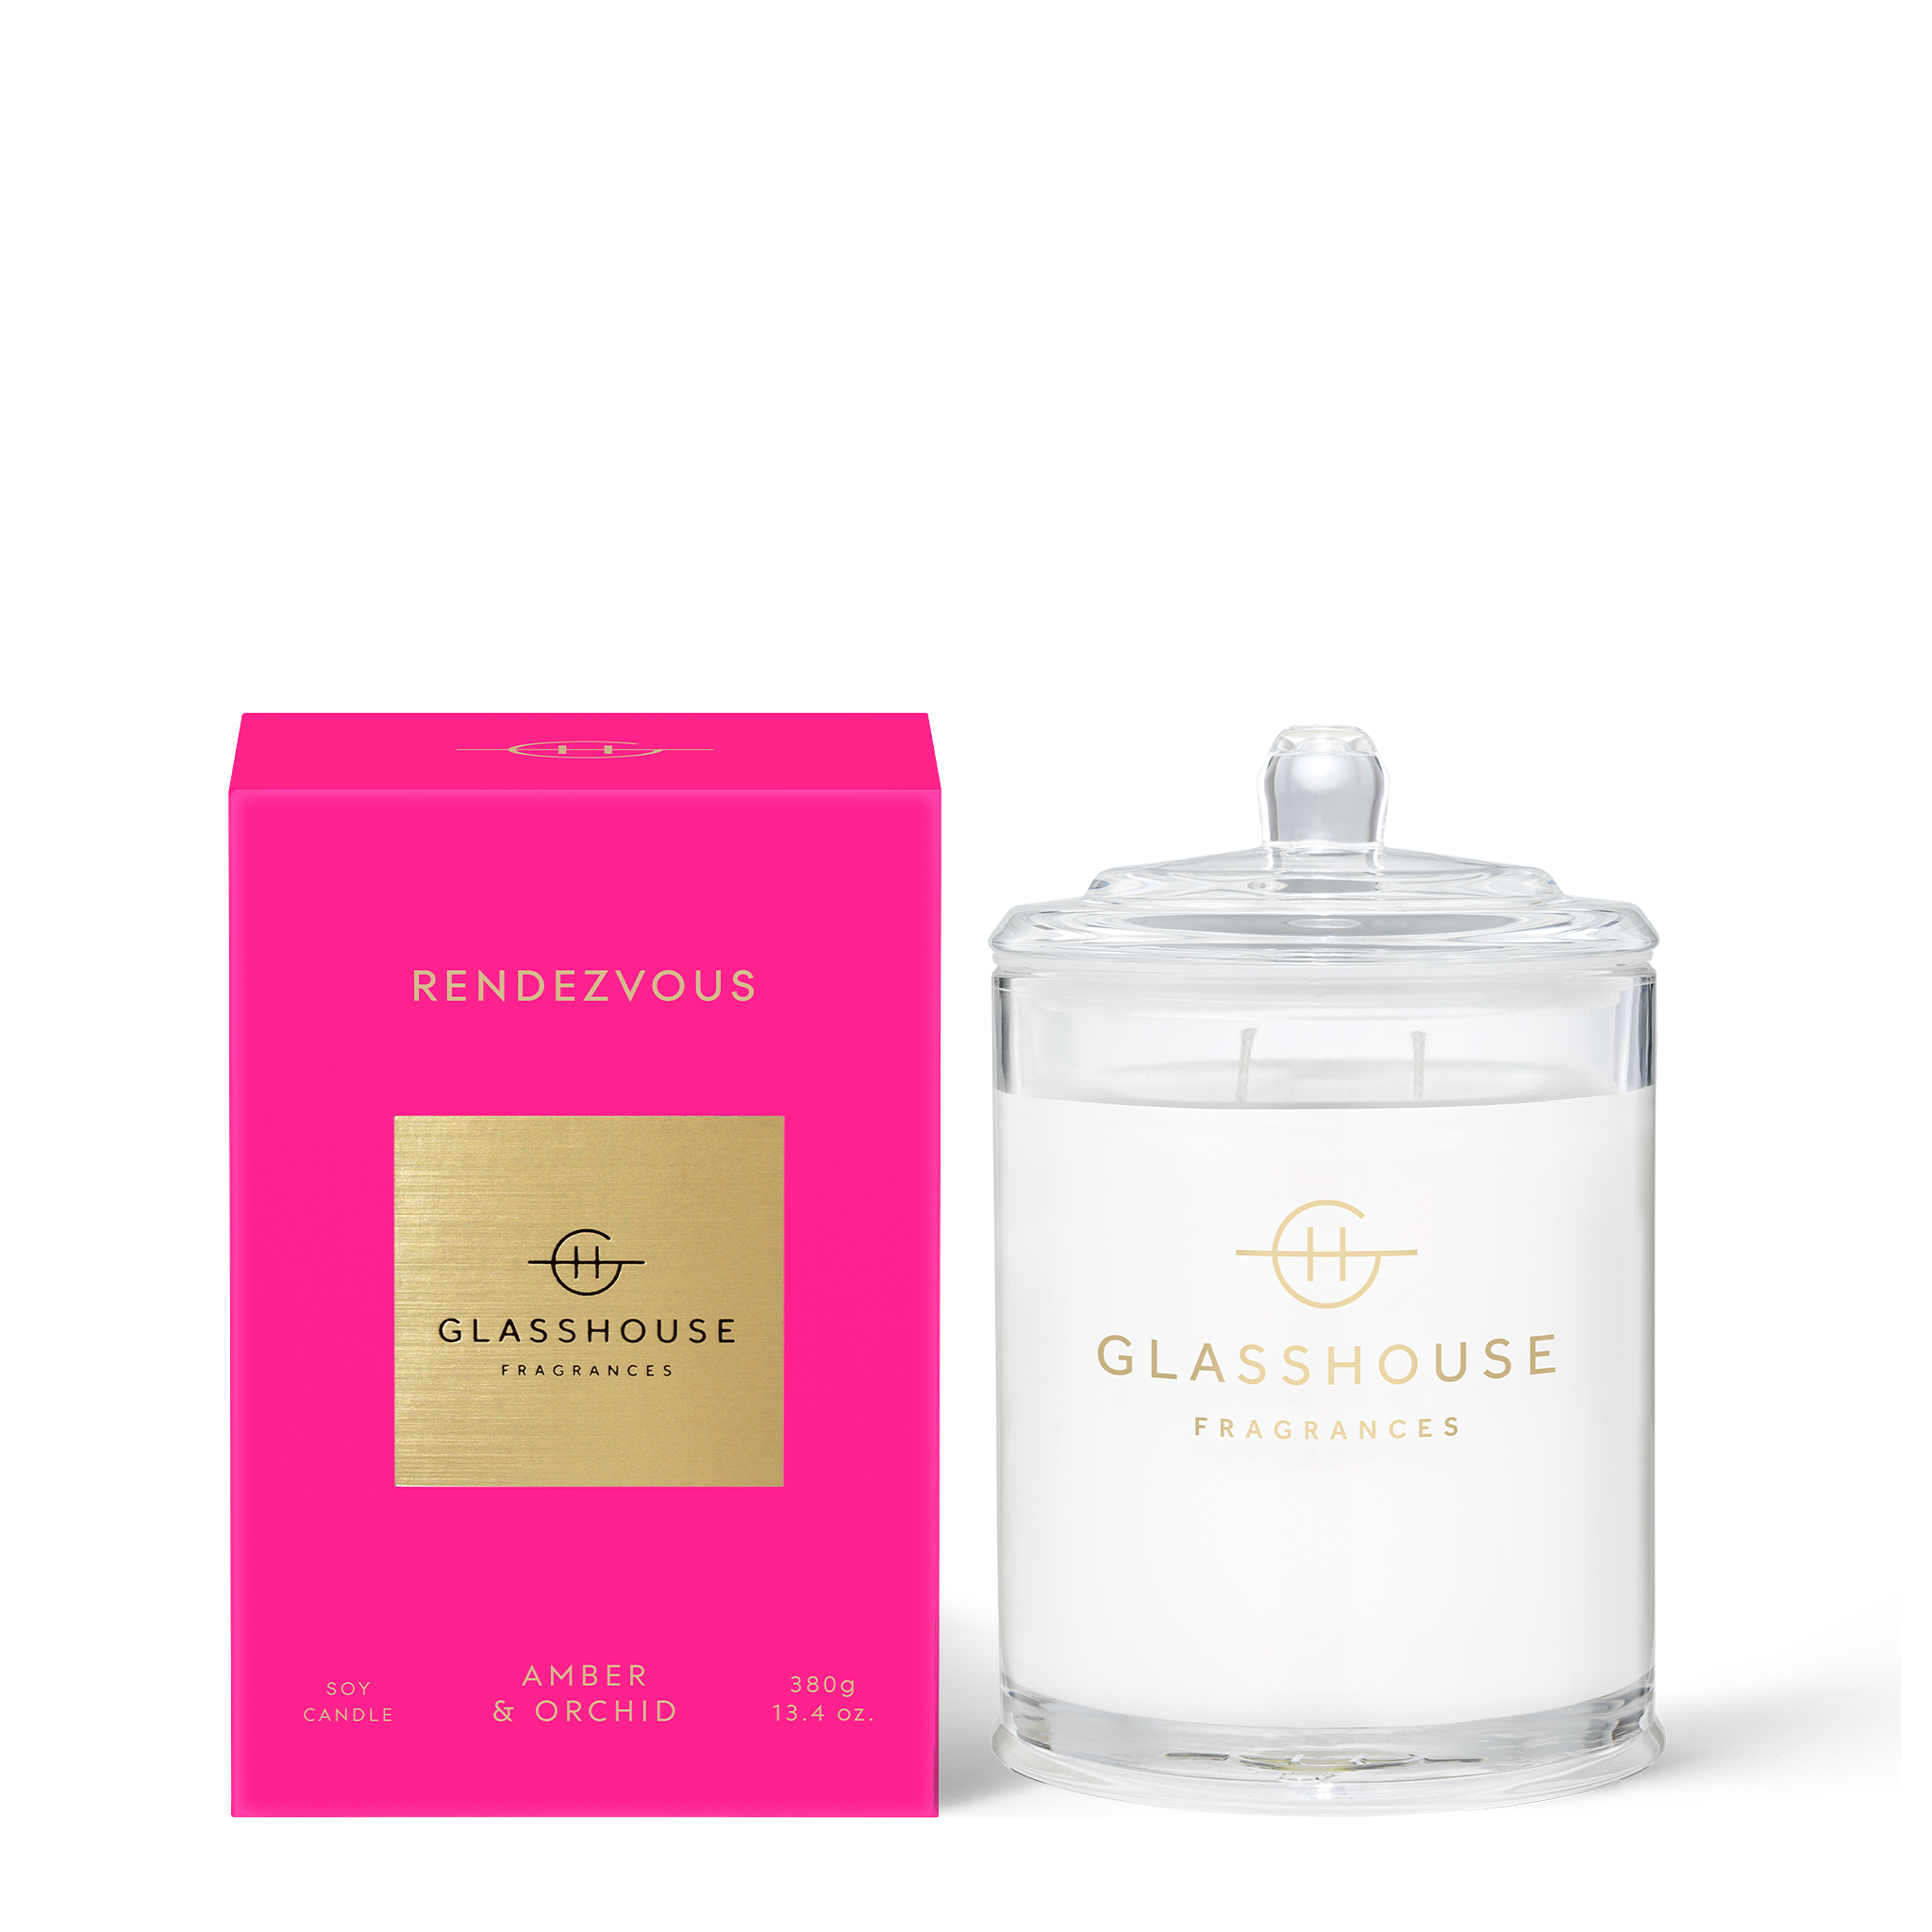 Glasshouse Rendezvous 380G Candle